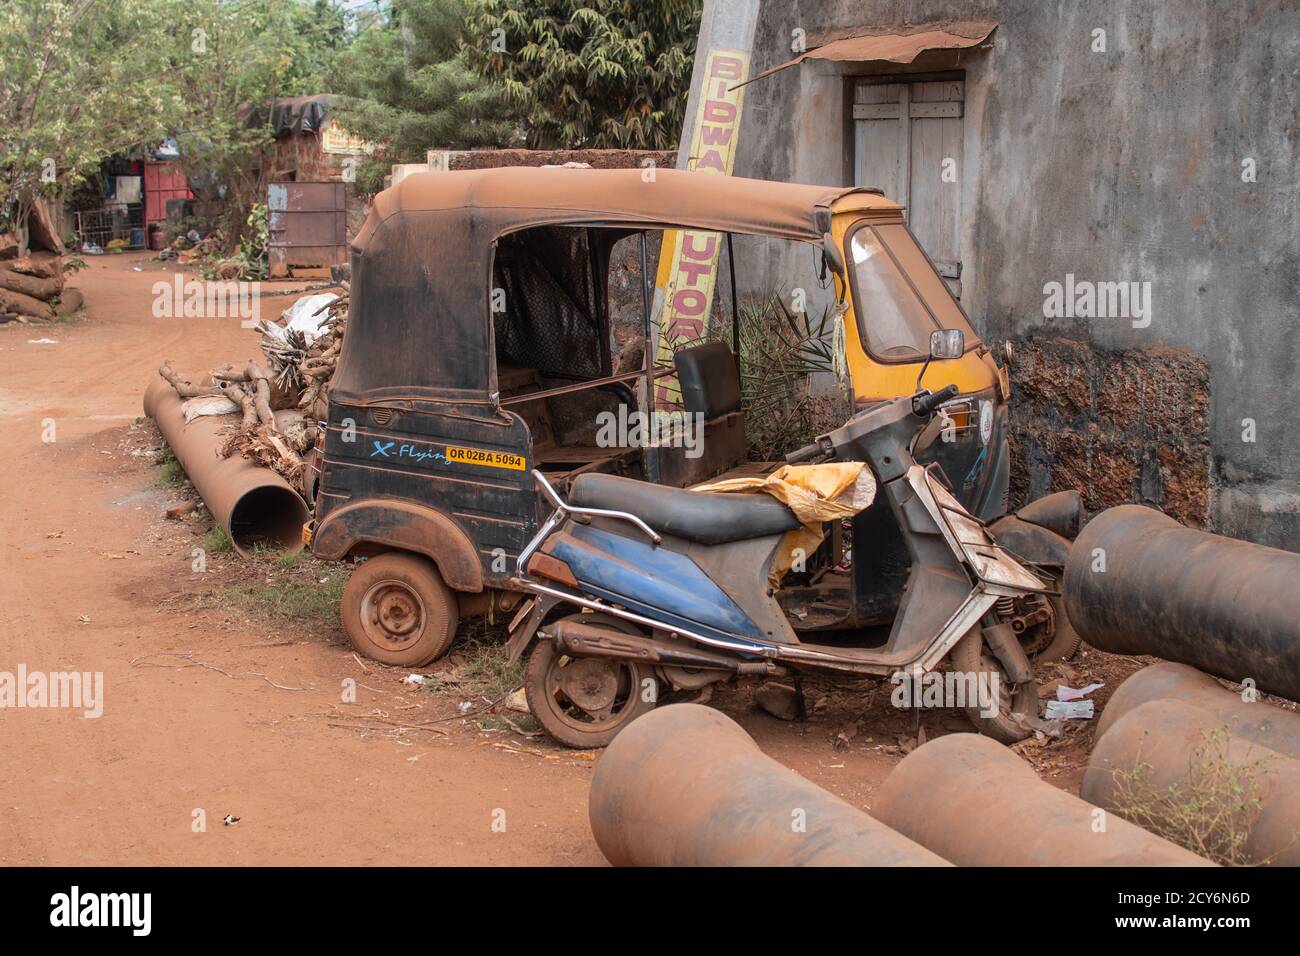 Bhubaneswar, India - February 4, 2020: An old abandoned auto rickshaw and a motorbike covered in dust and dirt on February 4, 2020 in Bhubaneswar Stock Photo